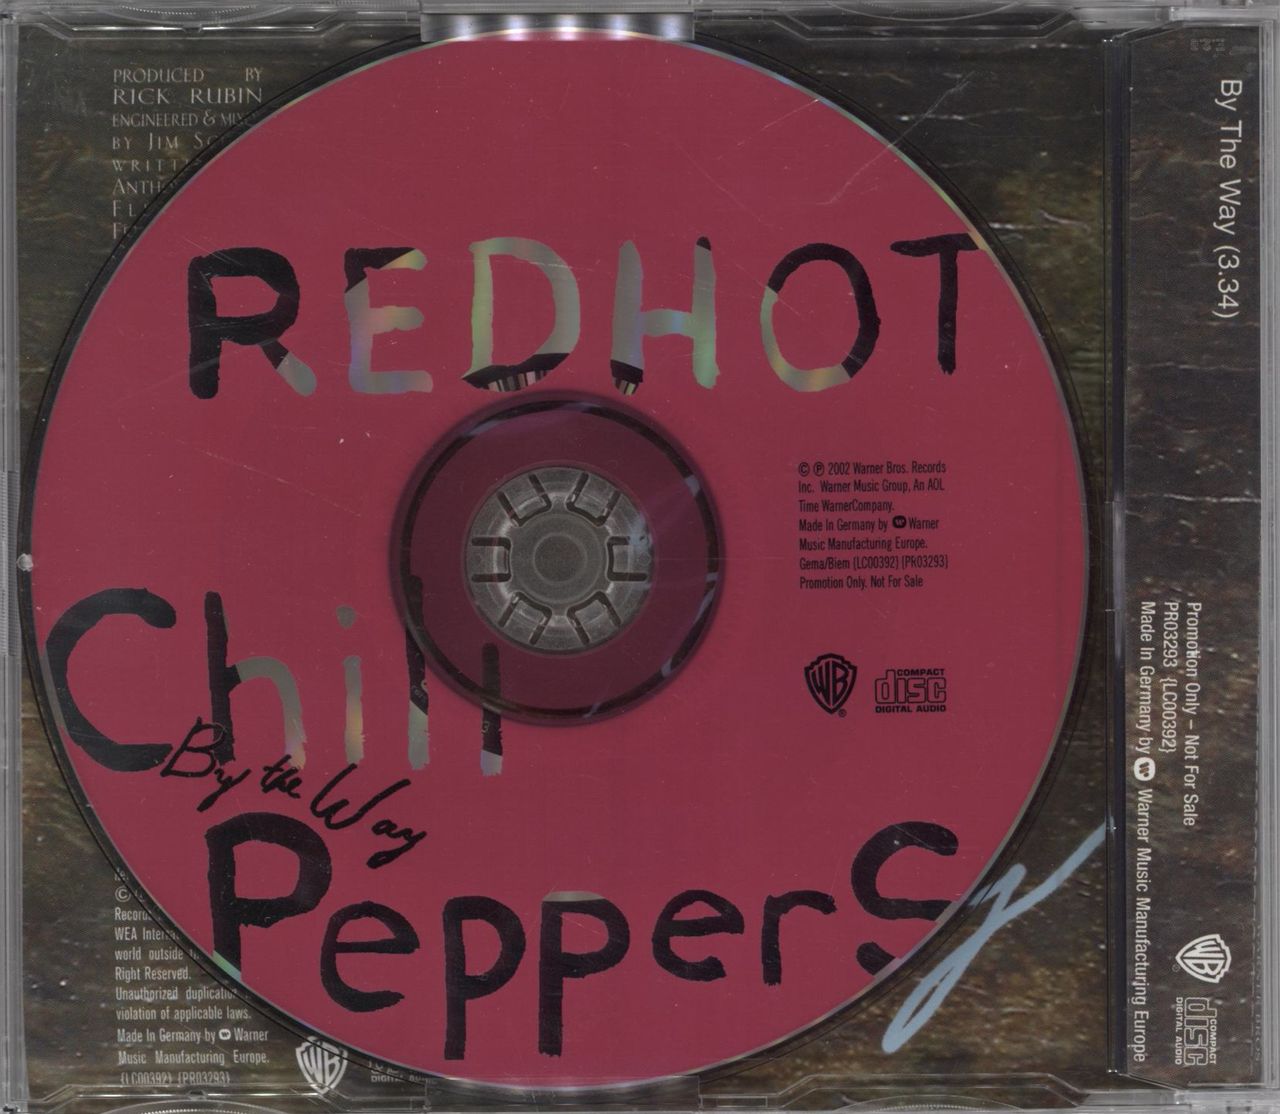 Red Hot Chili Peppers By The German CD single — RareVinyl.com